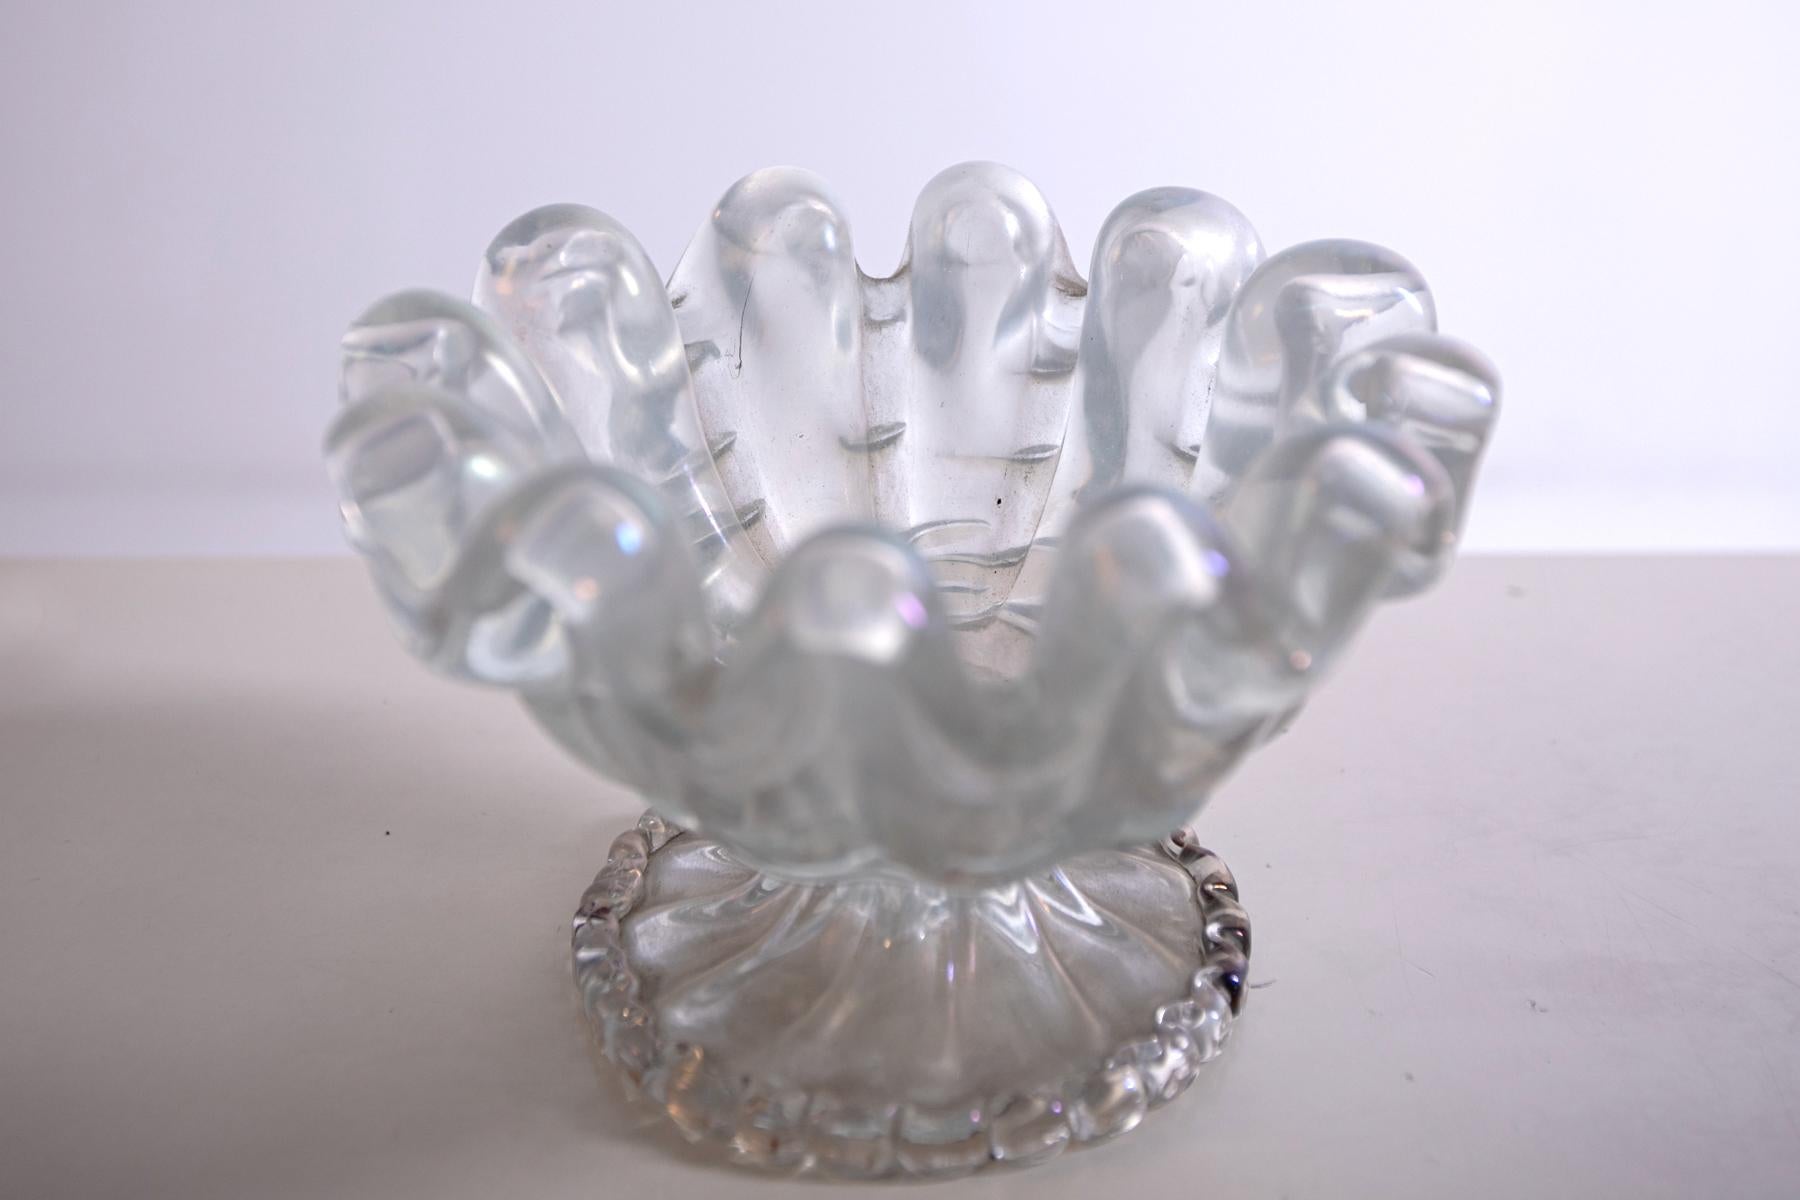 Elegant vase by Ercole Barovier of the 1930s. The vase is made with iridescent technique, in fact the whole object is made of iridescent crystal in the shape of a shell. The vase is ideal also as a cup as a table centerpiece.